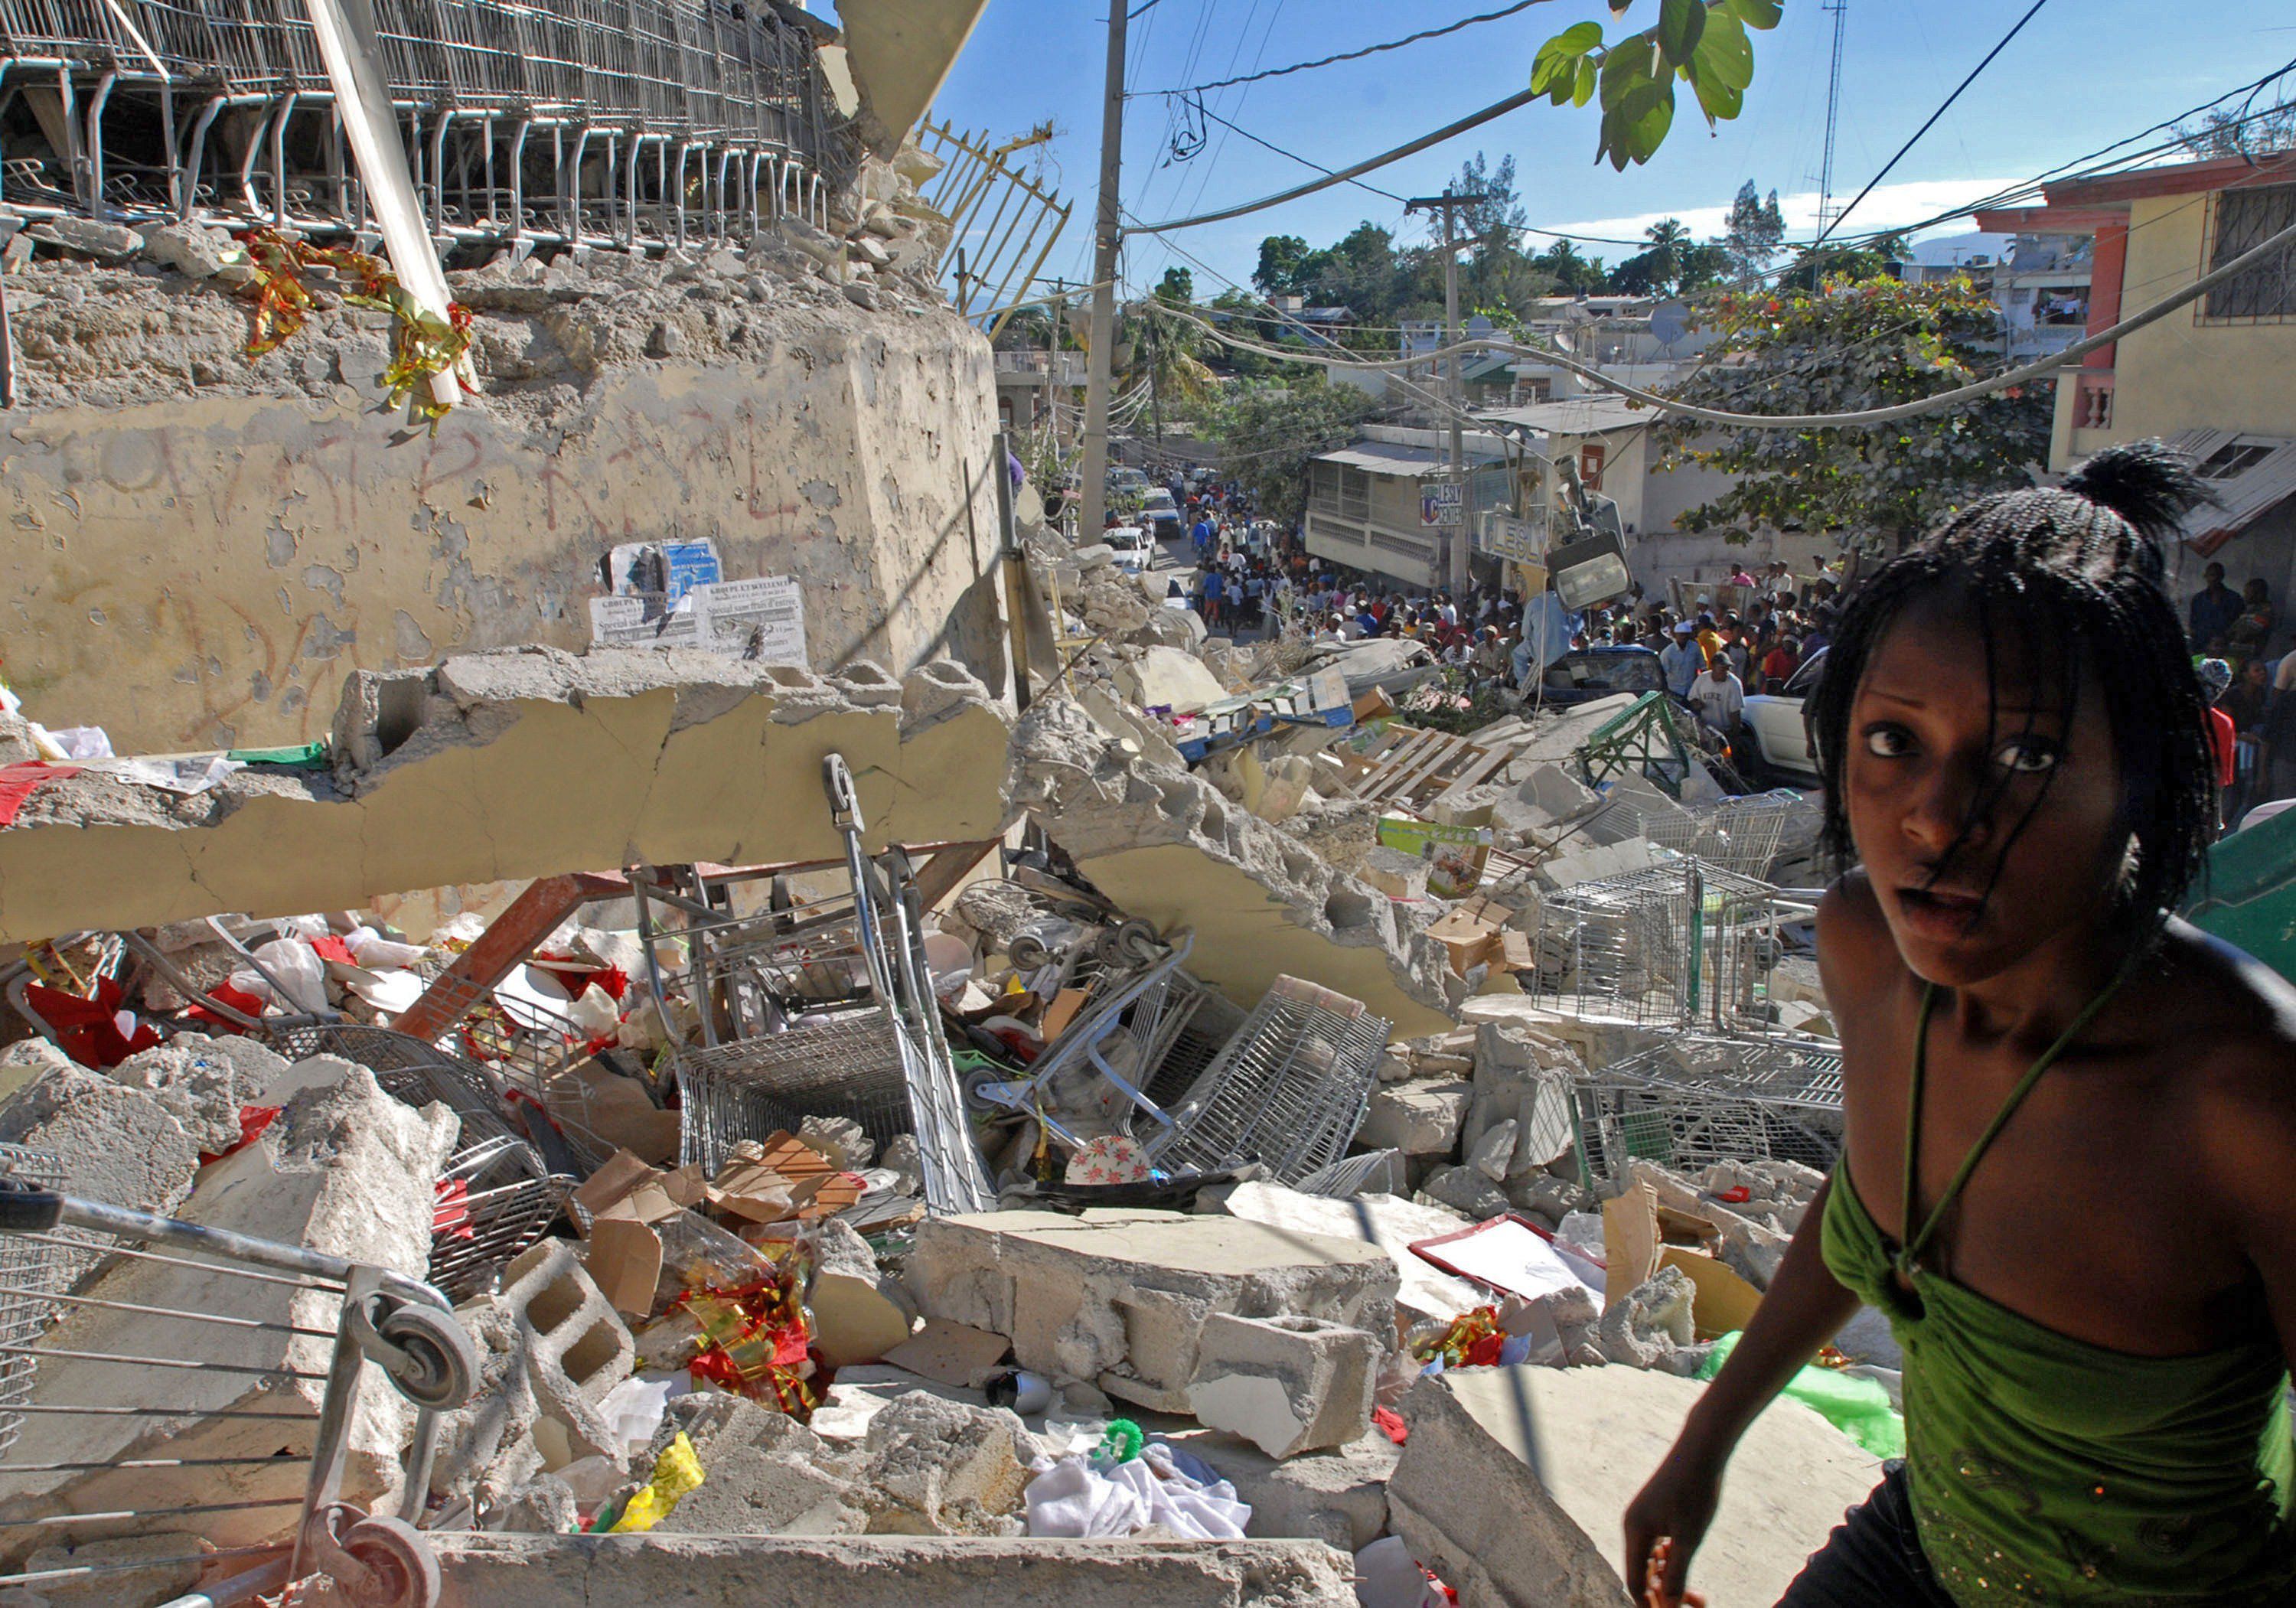 Image from 2010 showing the disaster left by the earthquake in Port-au-Prince.  AFP